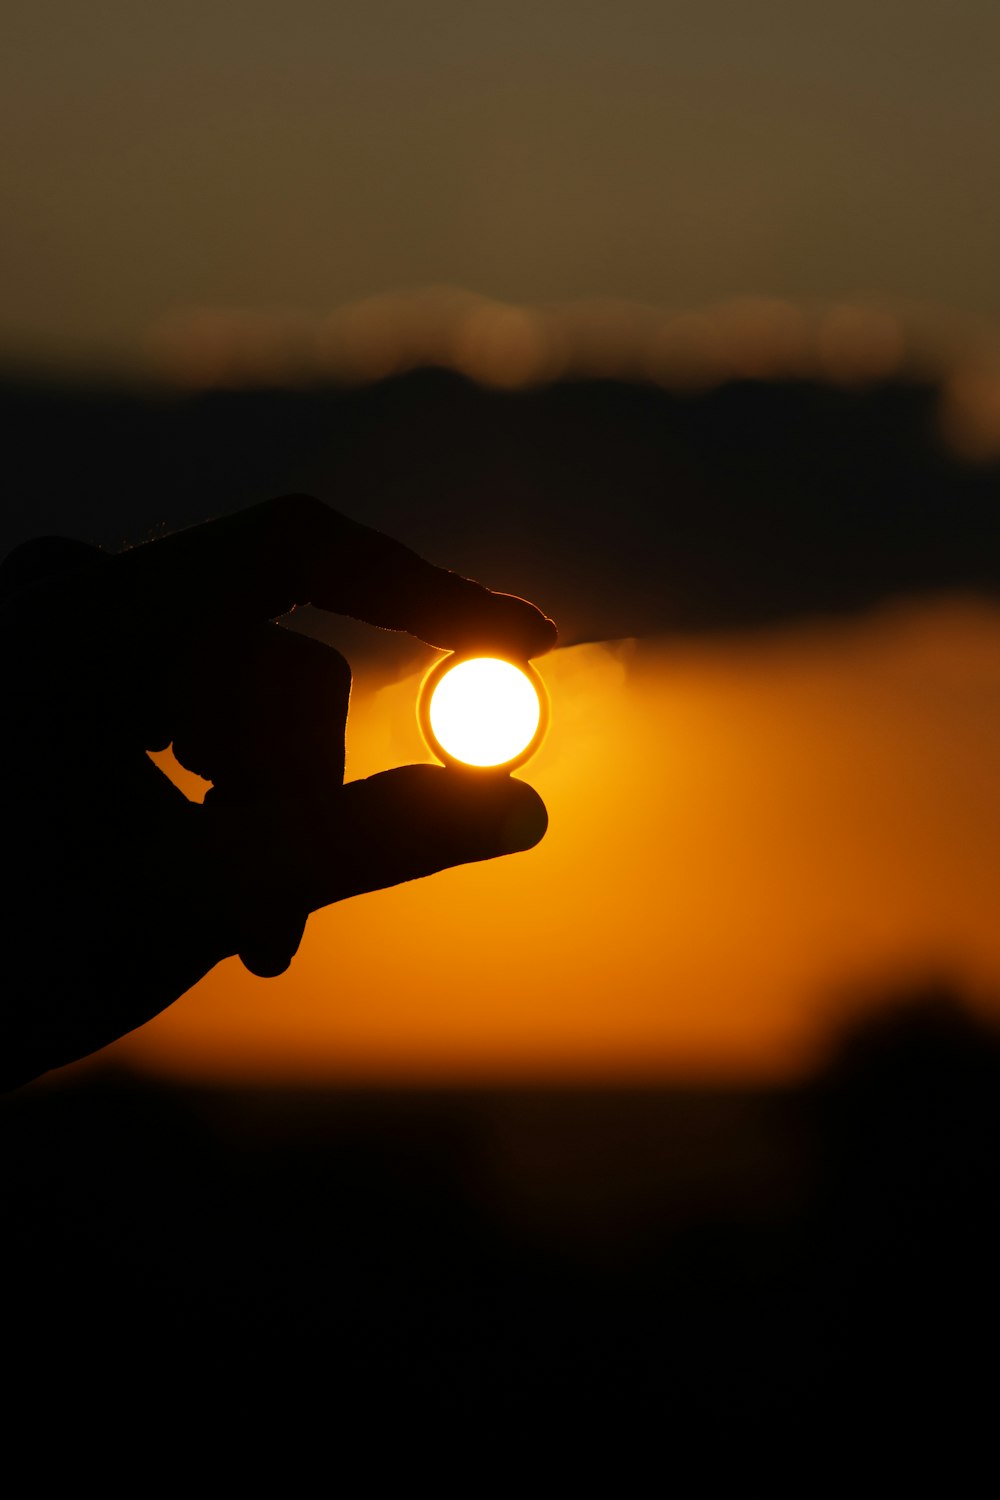 the sun is setting behind a silhouette of a person's hand